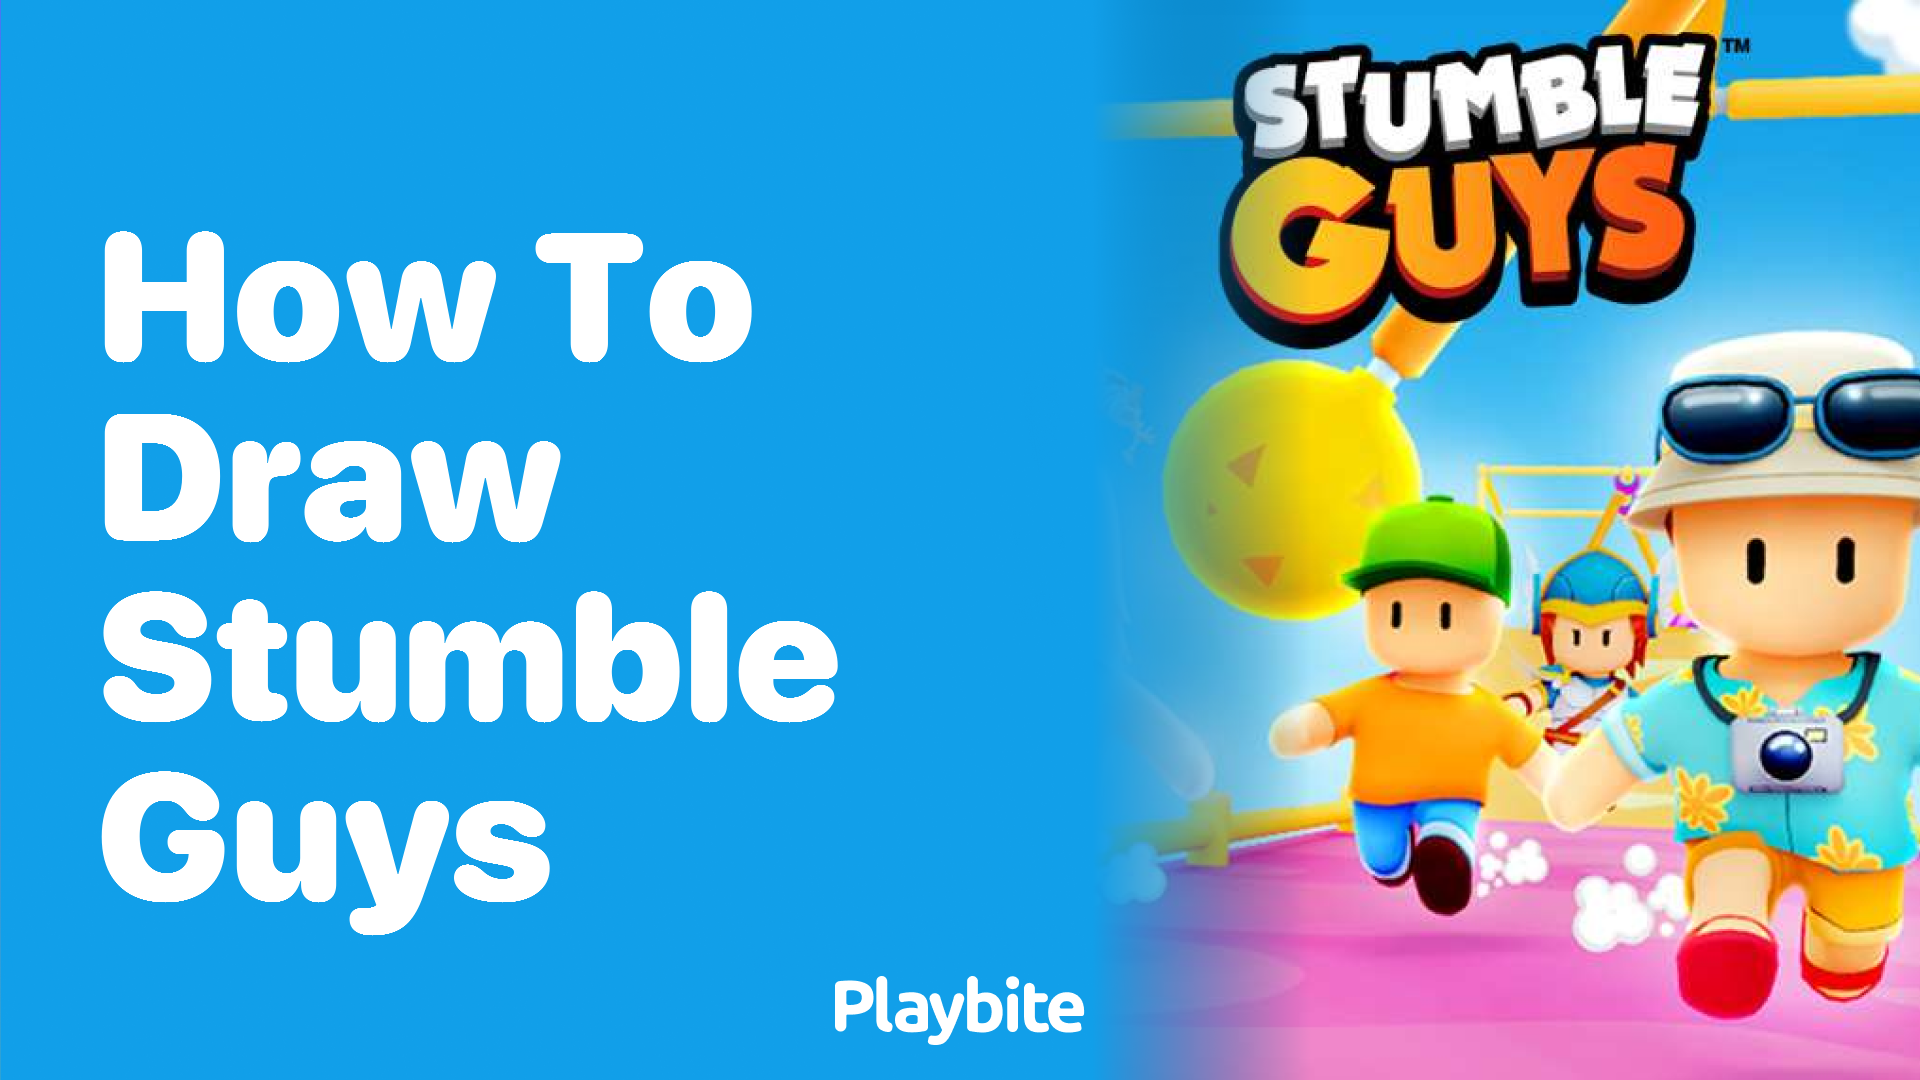 How to Draw Stumble Guys Characters for Fans and Artists Alike